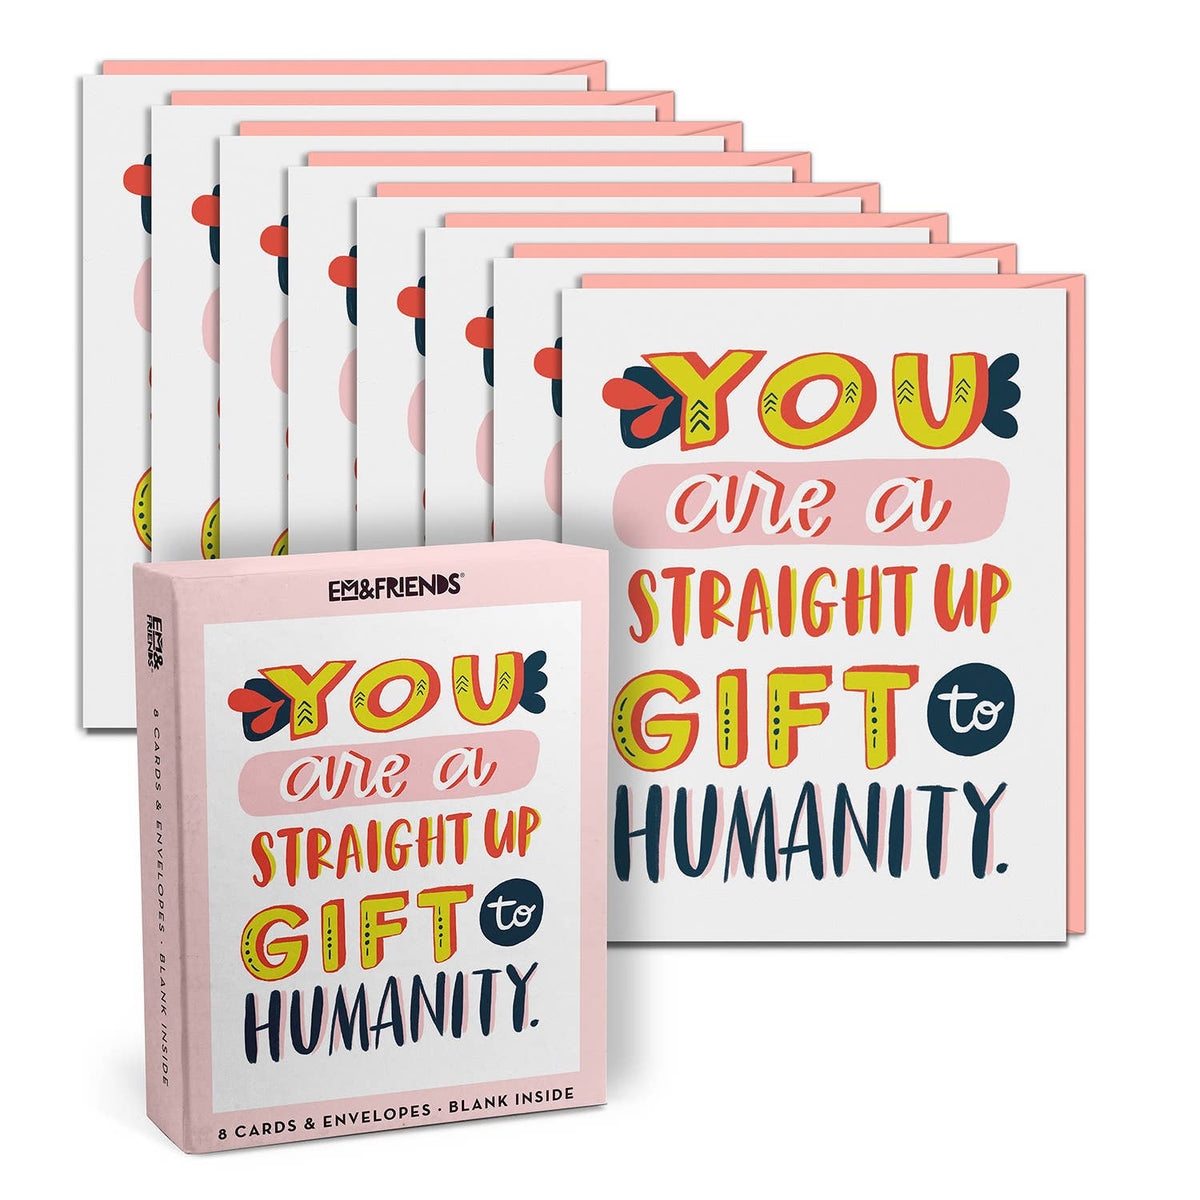 Hinged Box with 8 Cards reading "you are a straight up gift to humanity" made by emily mcdowell